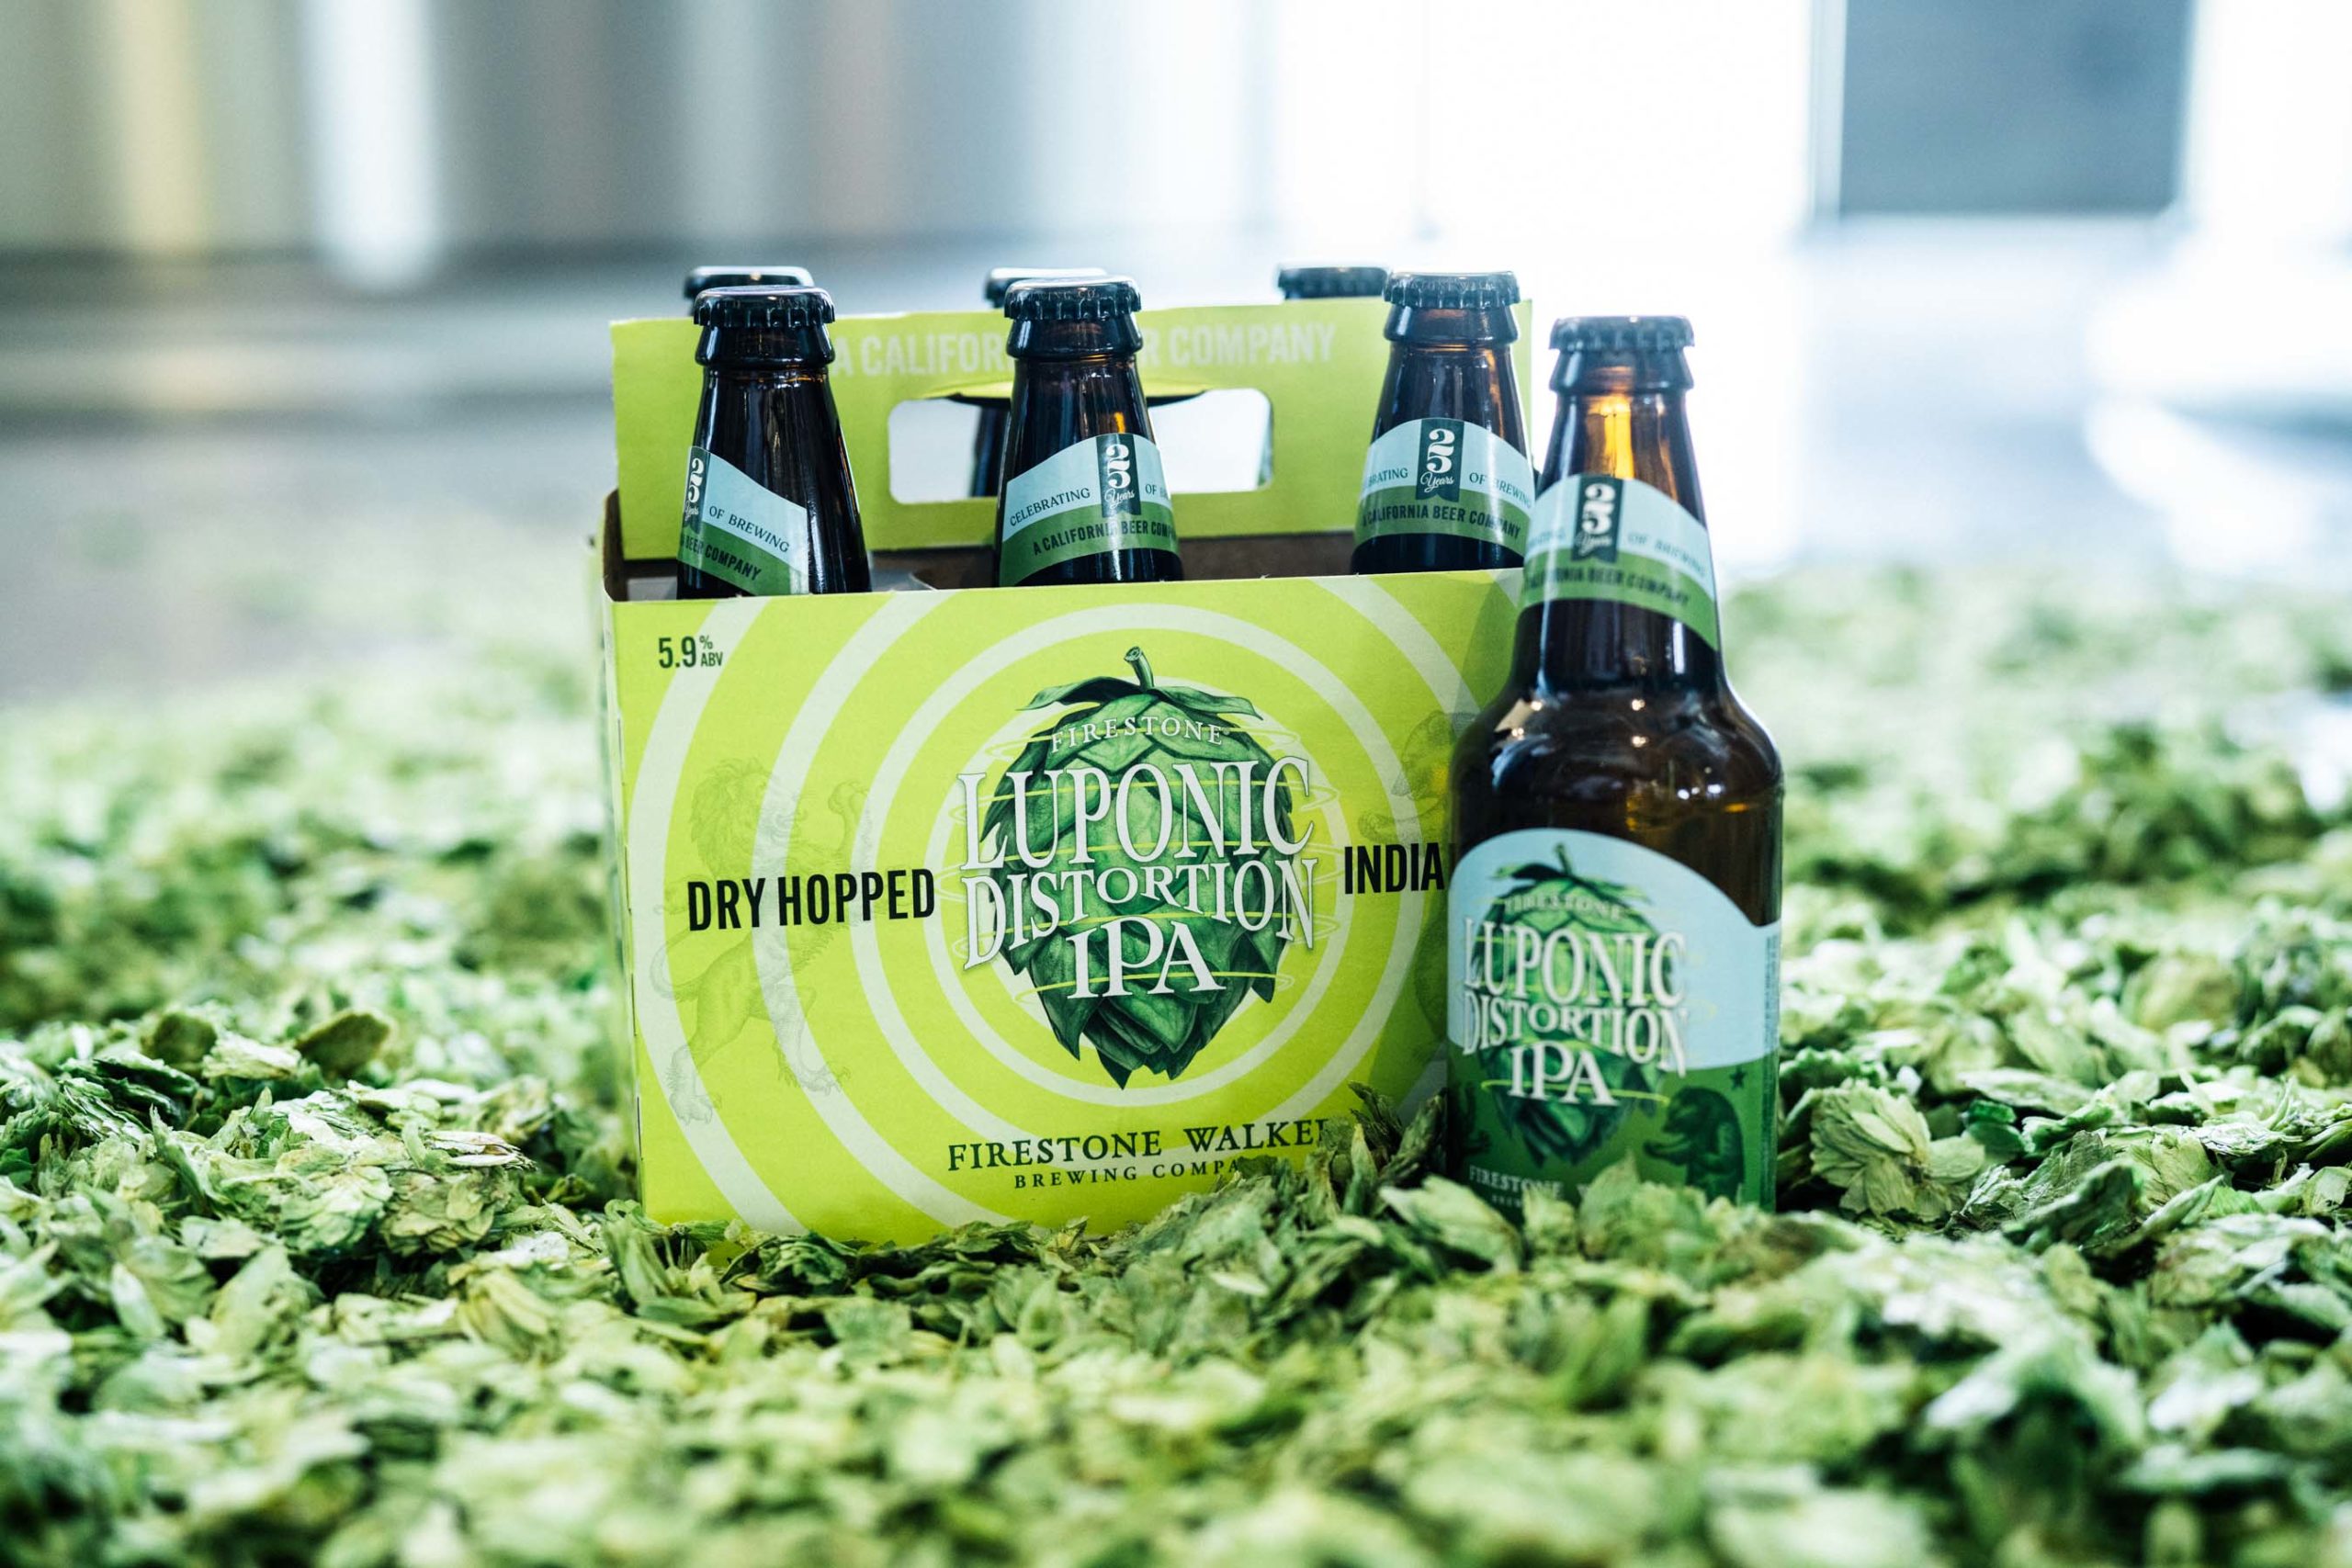 The Story Behind Luponic Distortion: Firestone Walker’s Experimental Hop Series